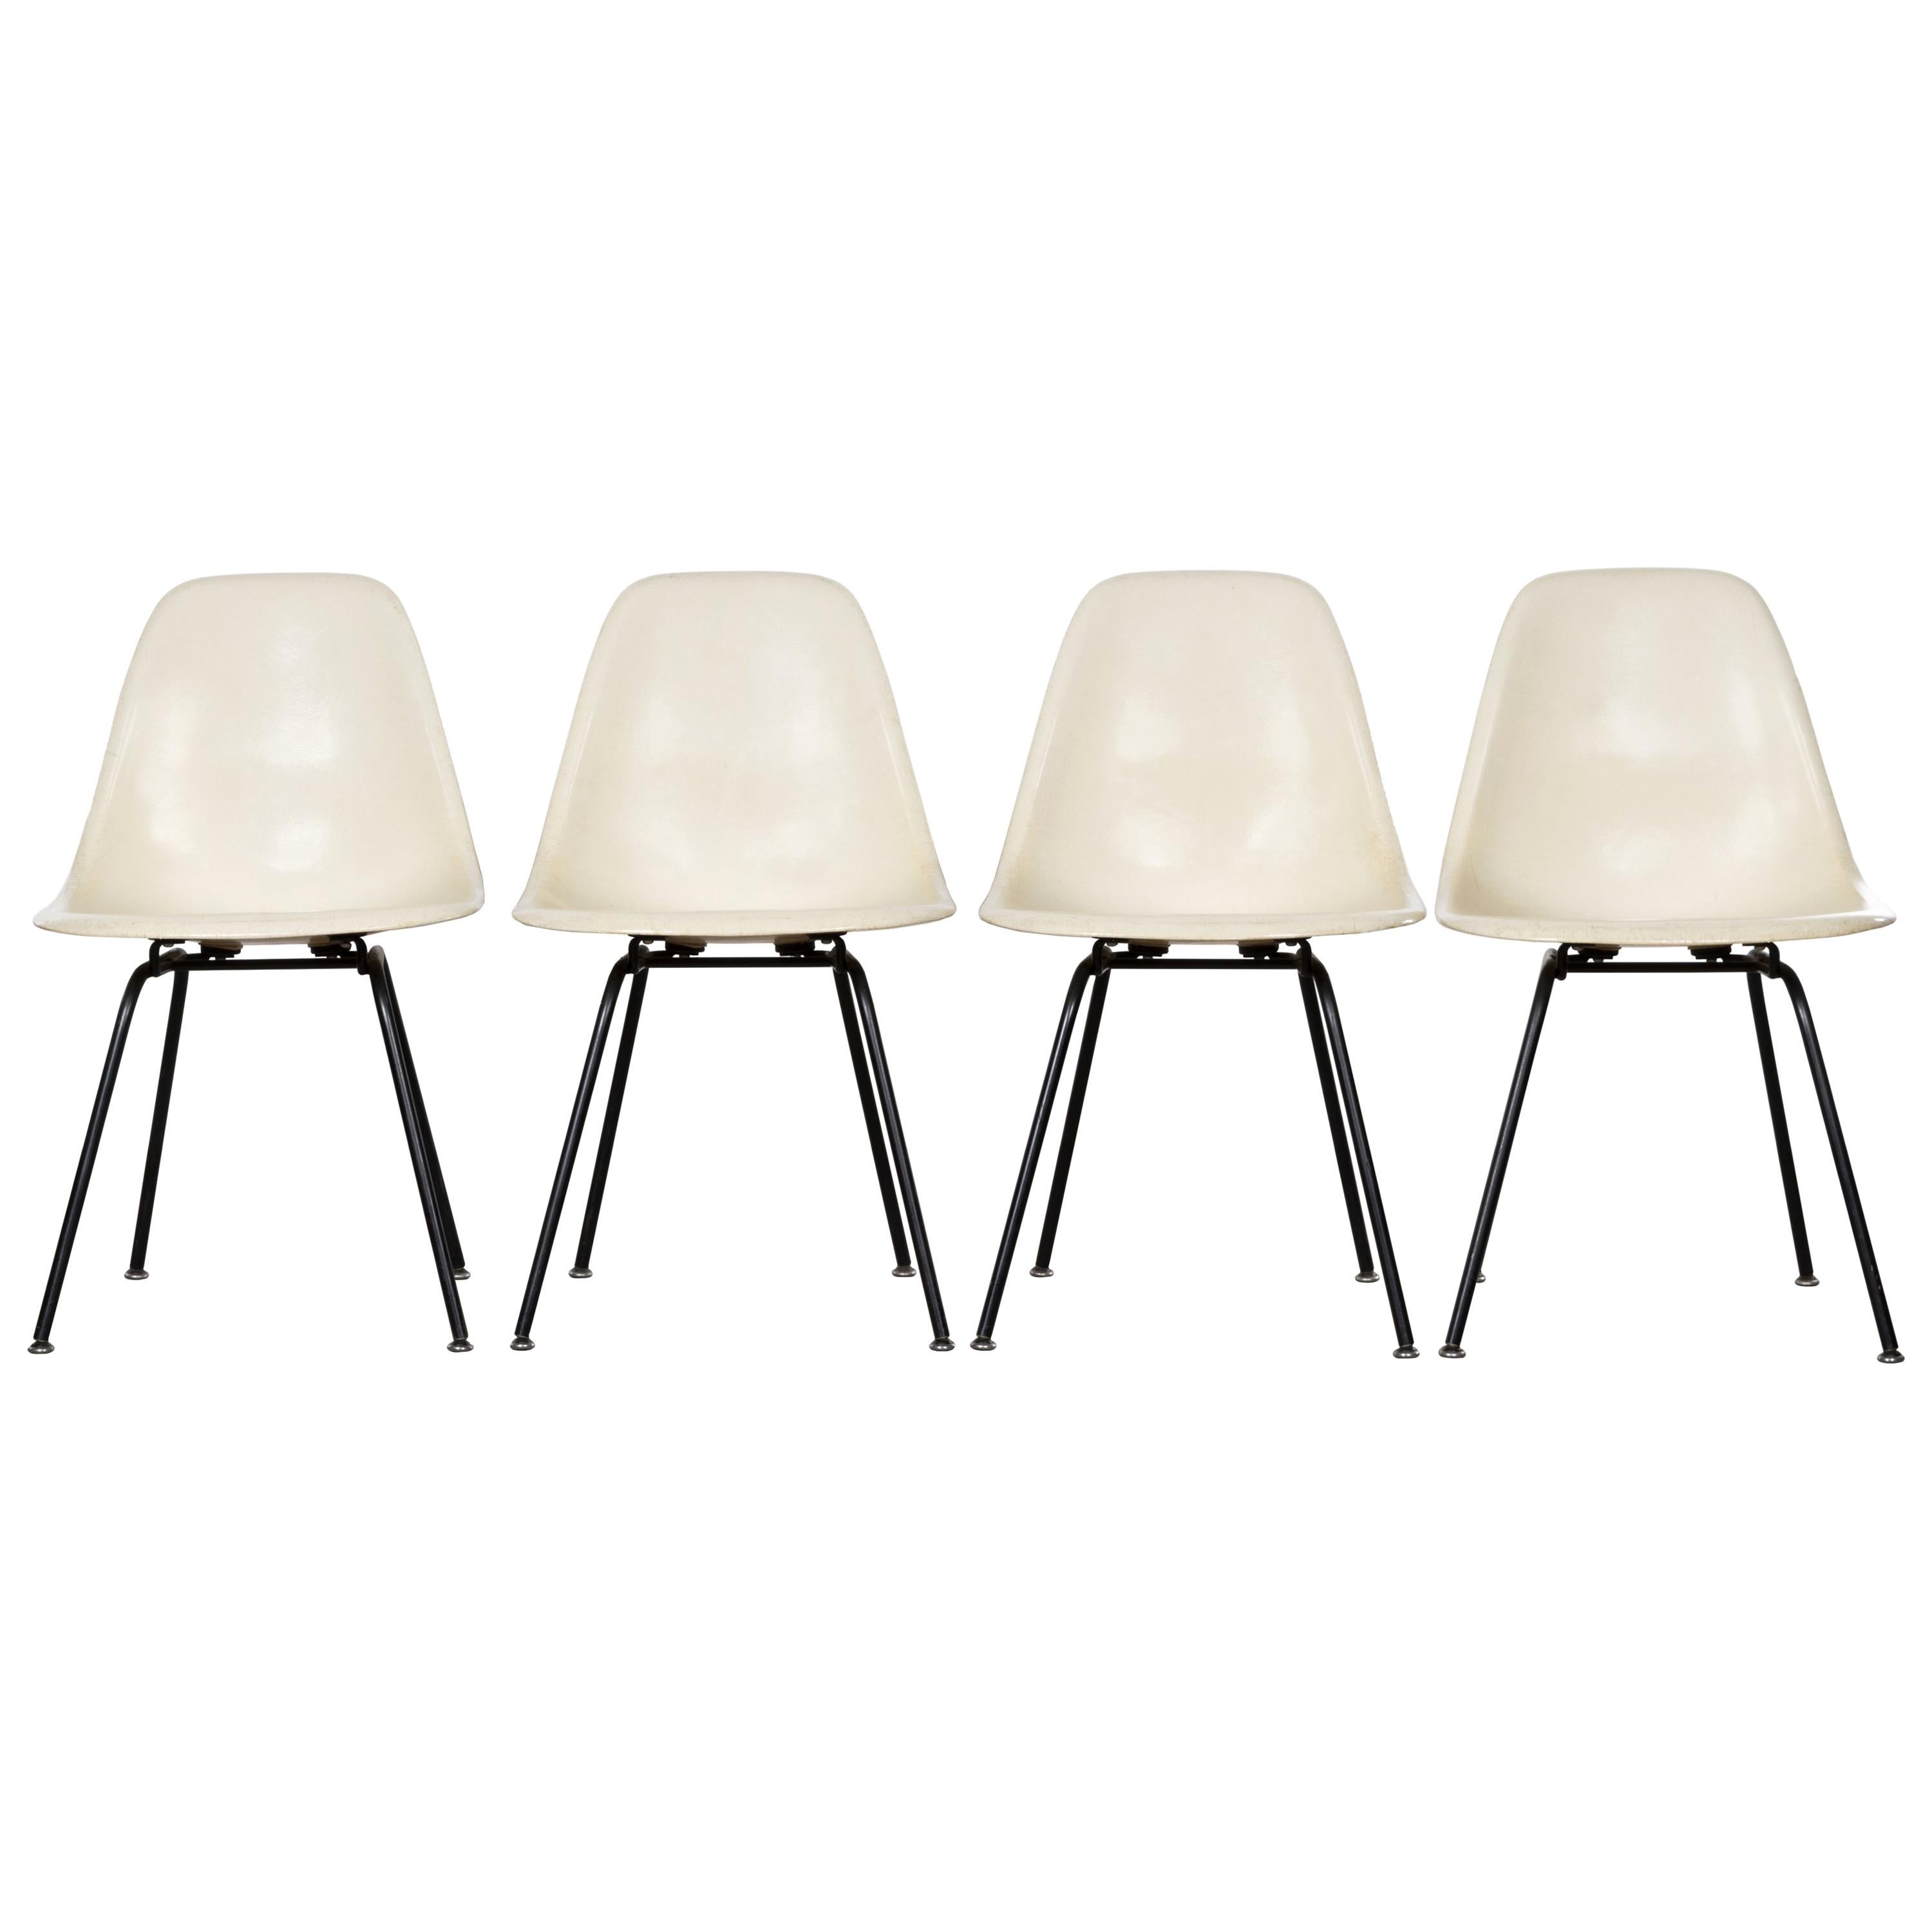 Set of 4 Early Parchment Eames DSX Dining Chairs for Herman Miller